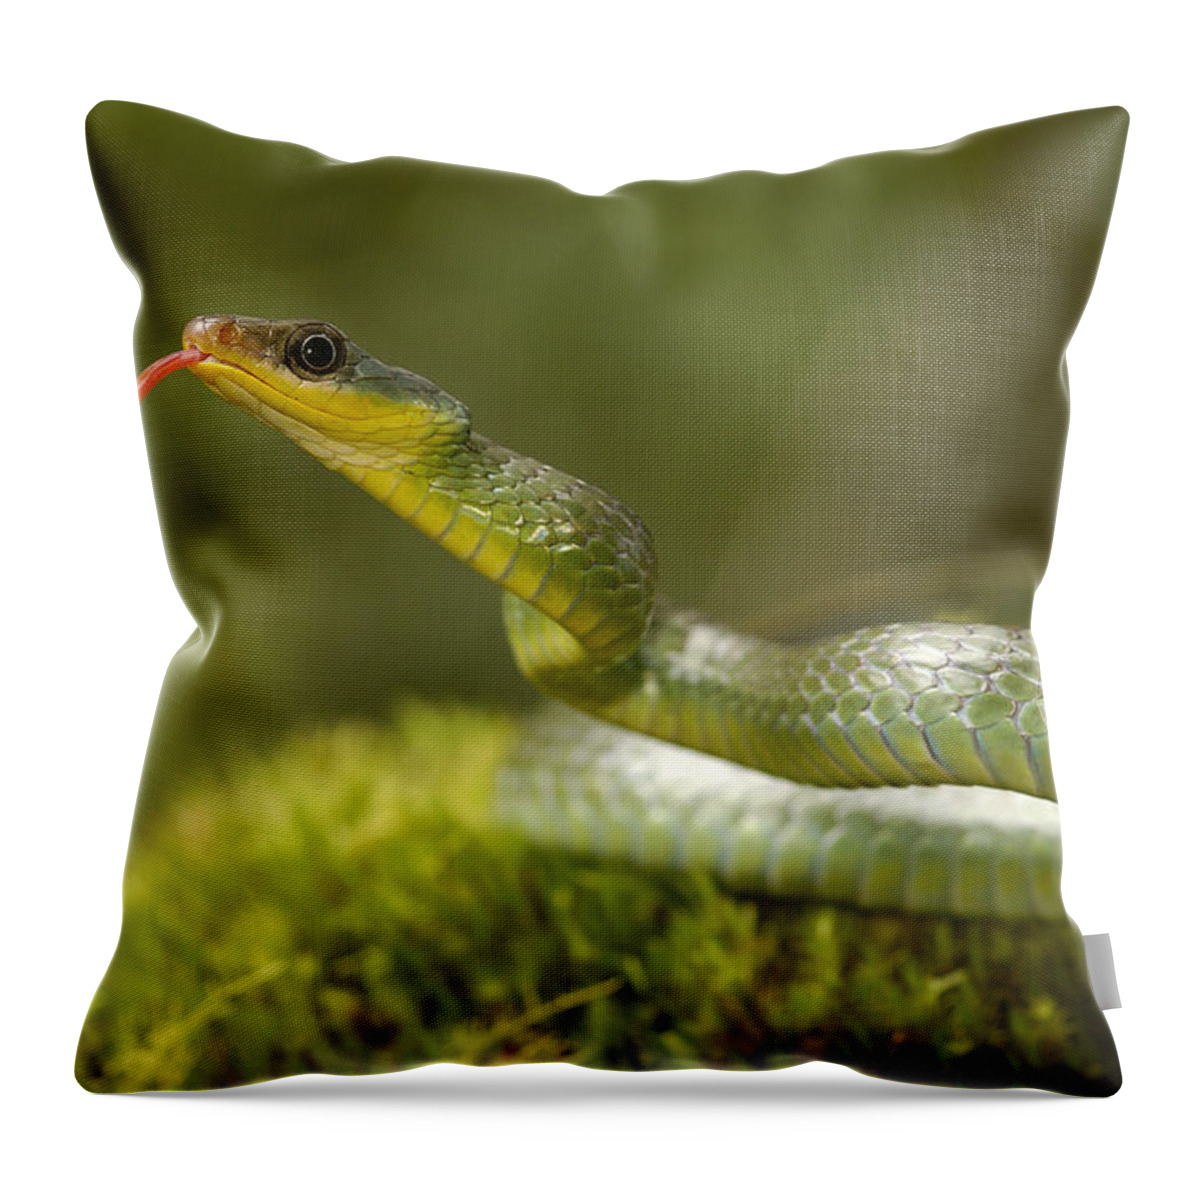 Mp Throw Pillow featuring the photograph Mountain Sipo Chironius Monticola by Pete Oxford